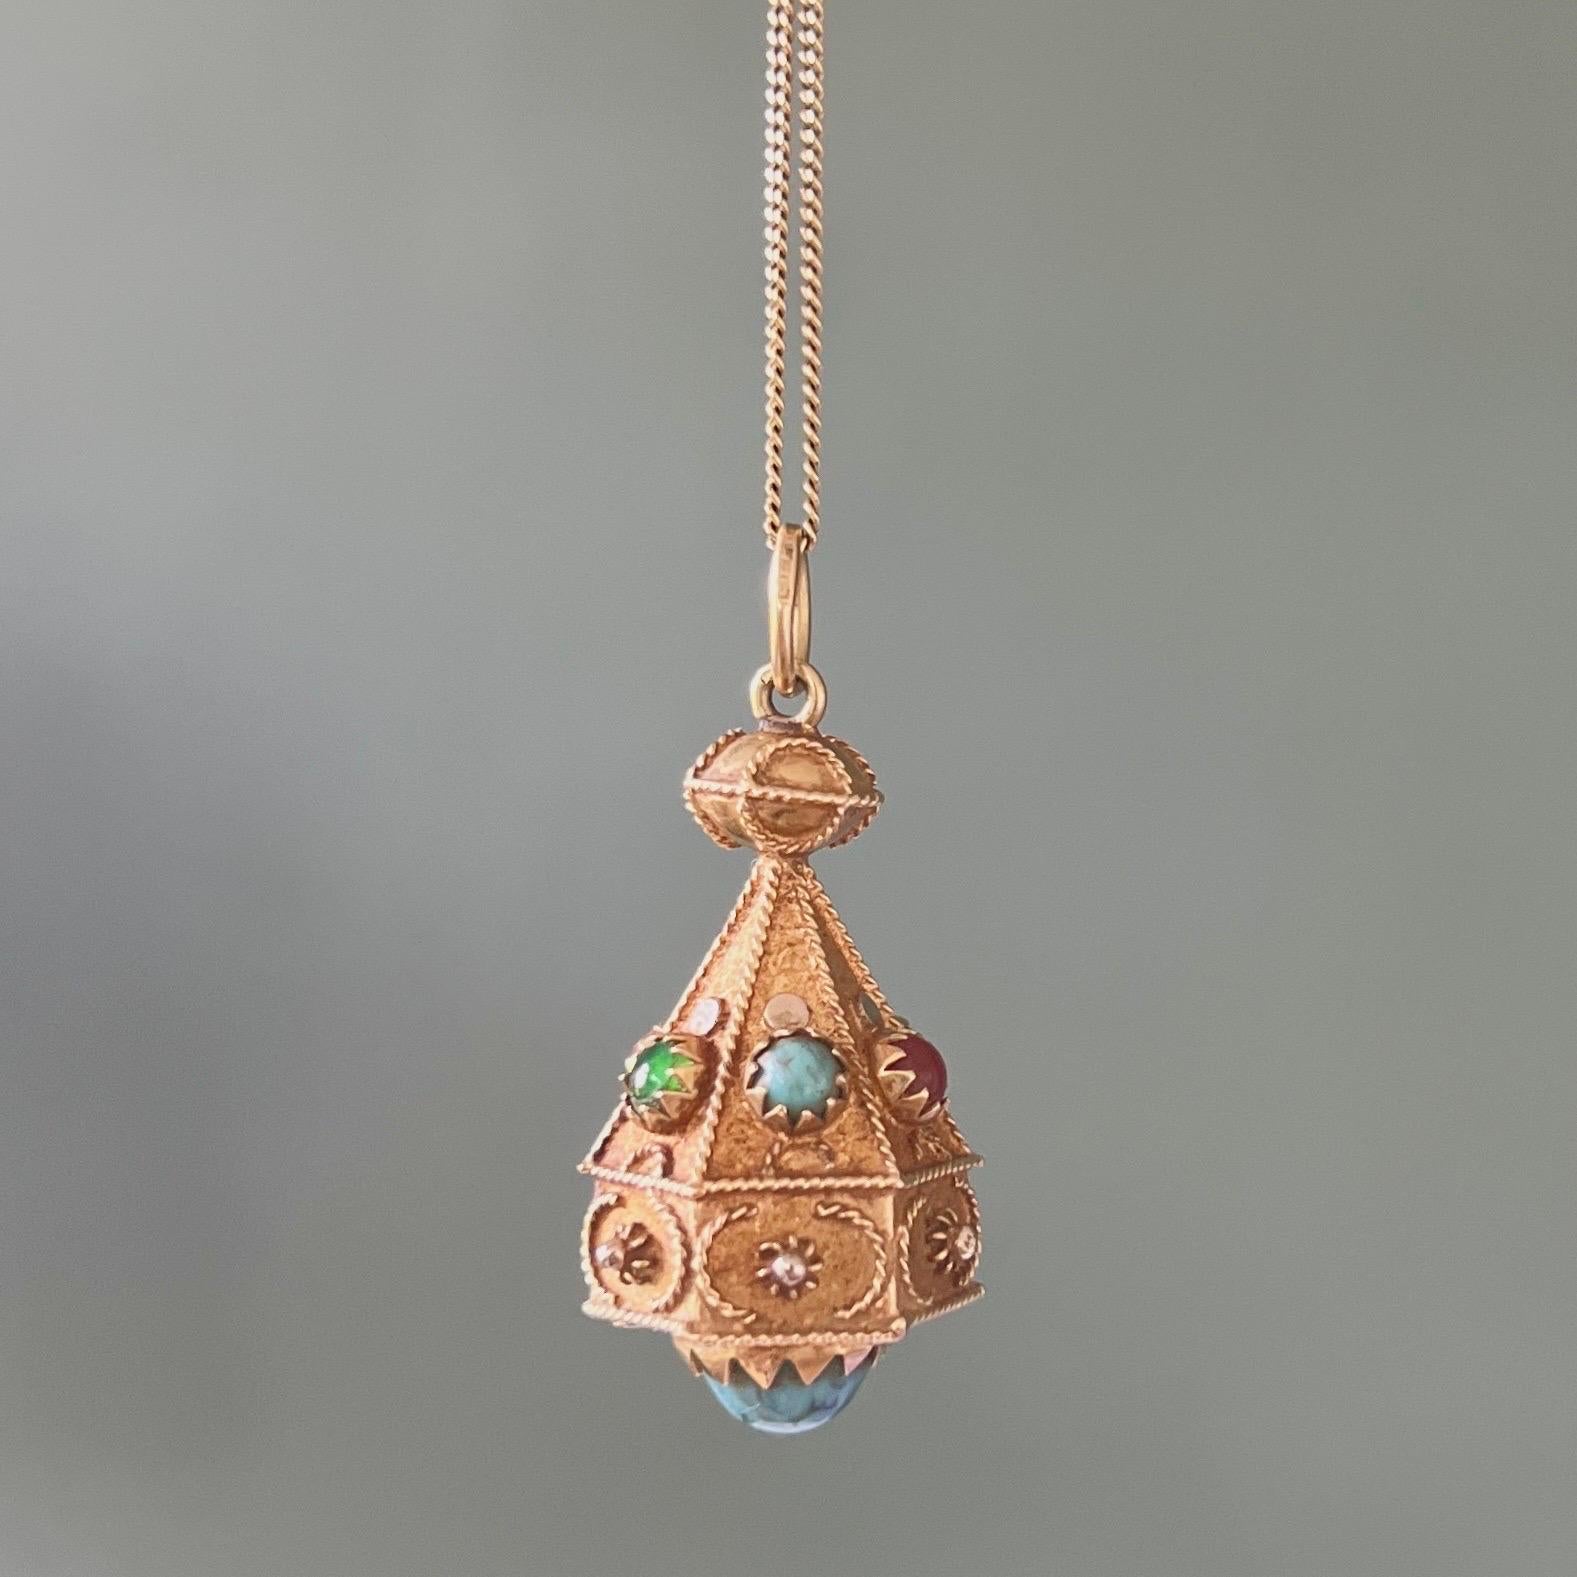 An attractive Etruscan Revival 14 karat gold cannetille charm pendant. This pendant is decorated with cannetille and set with various colored cabochon cut gemstones. Smaller stones are set on the six angular sides, including turquoise, carnelian and